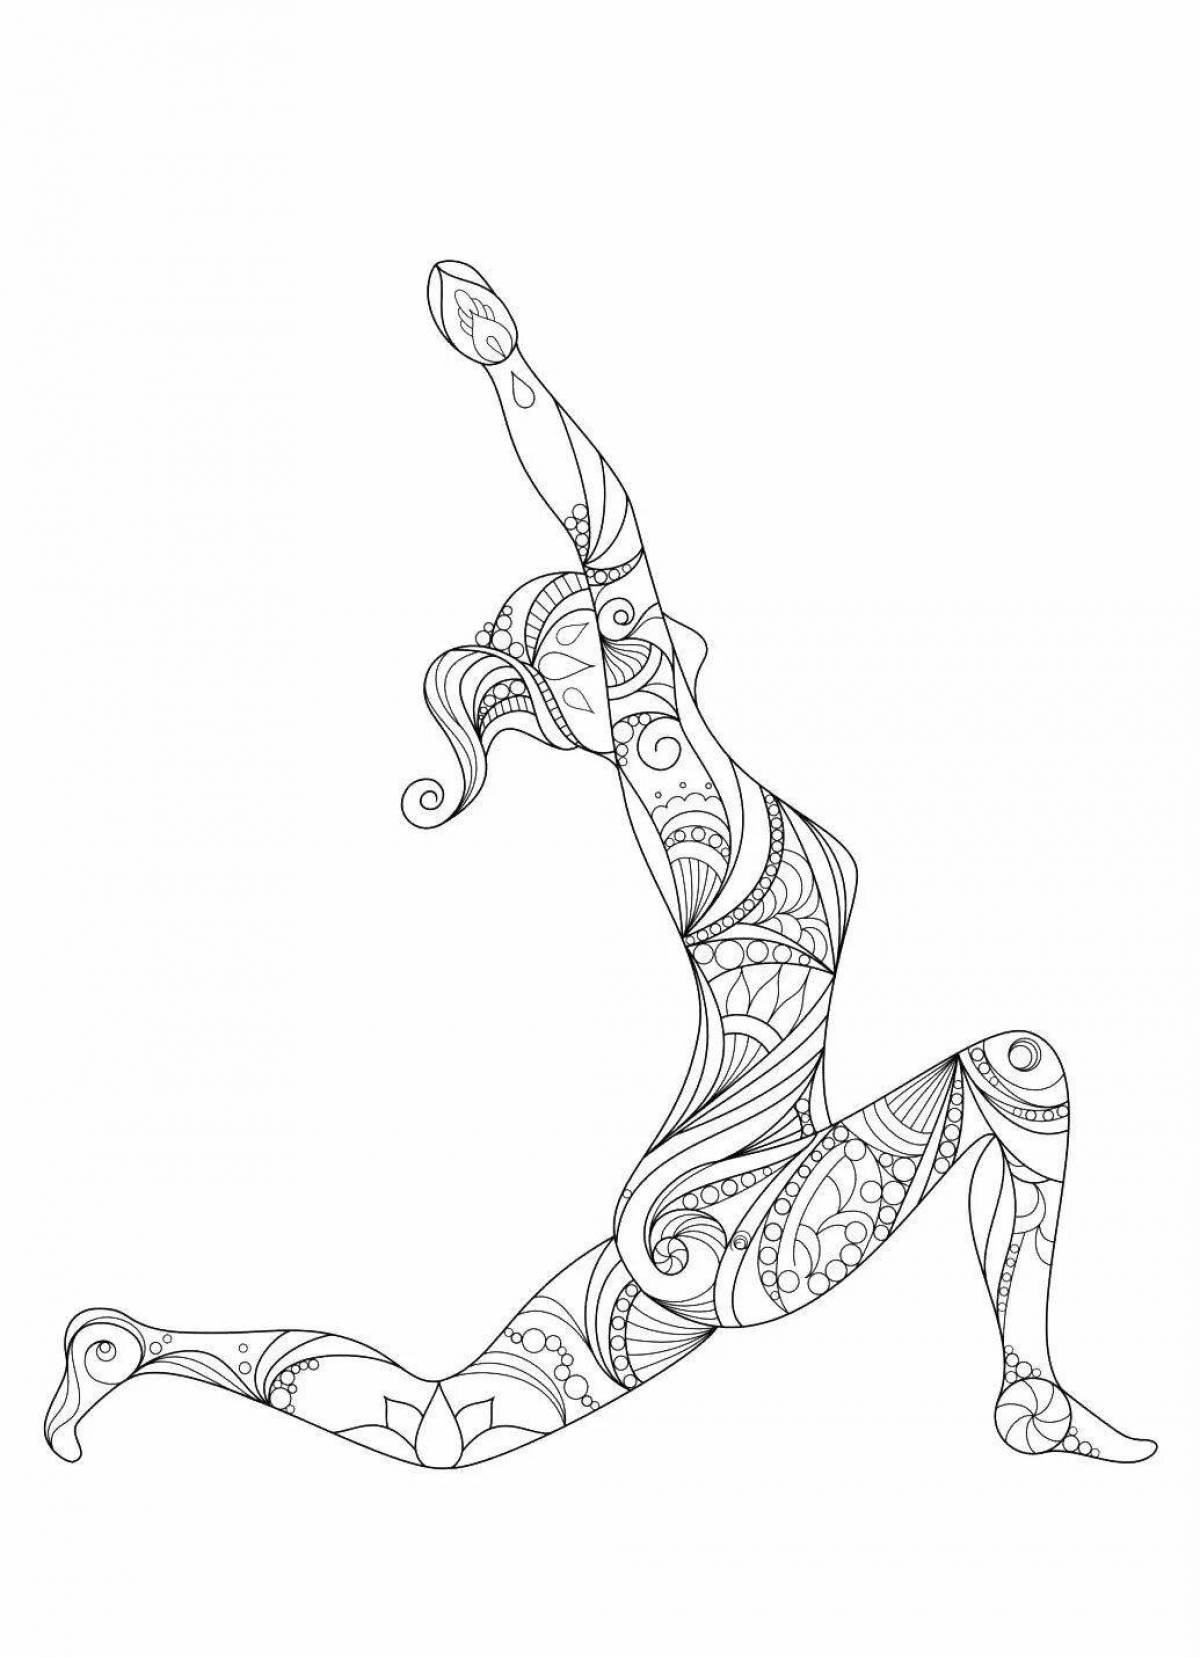 Live poses coloring page